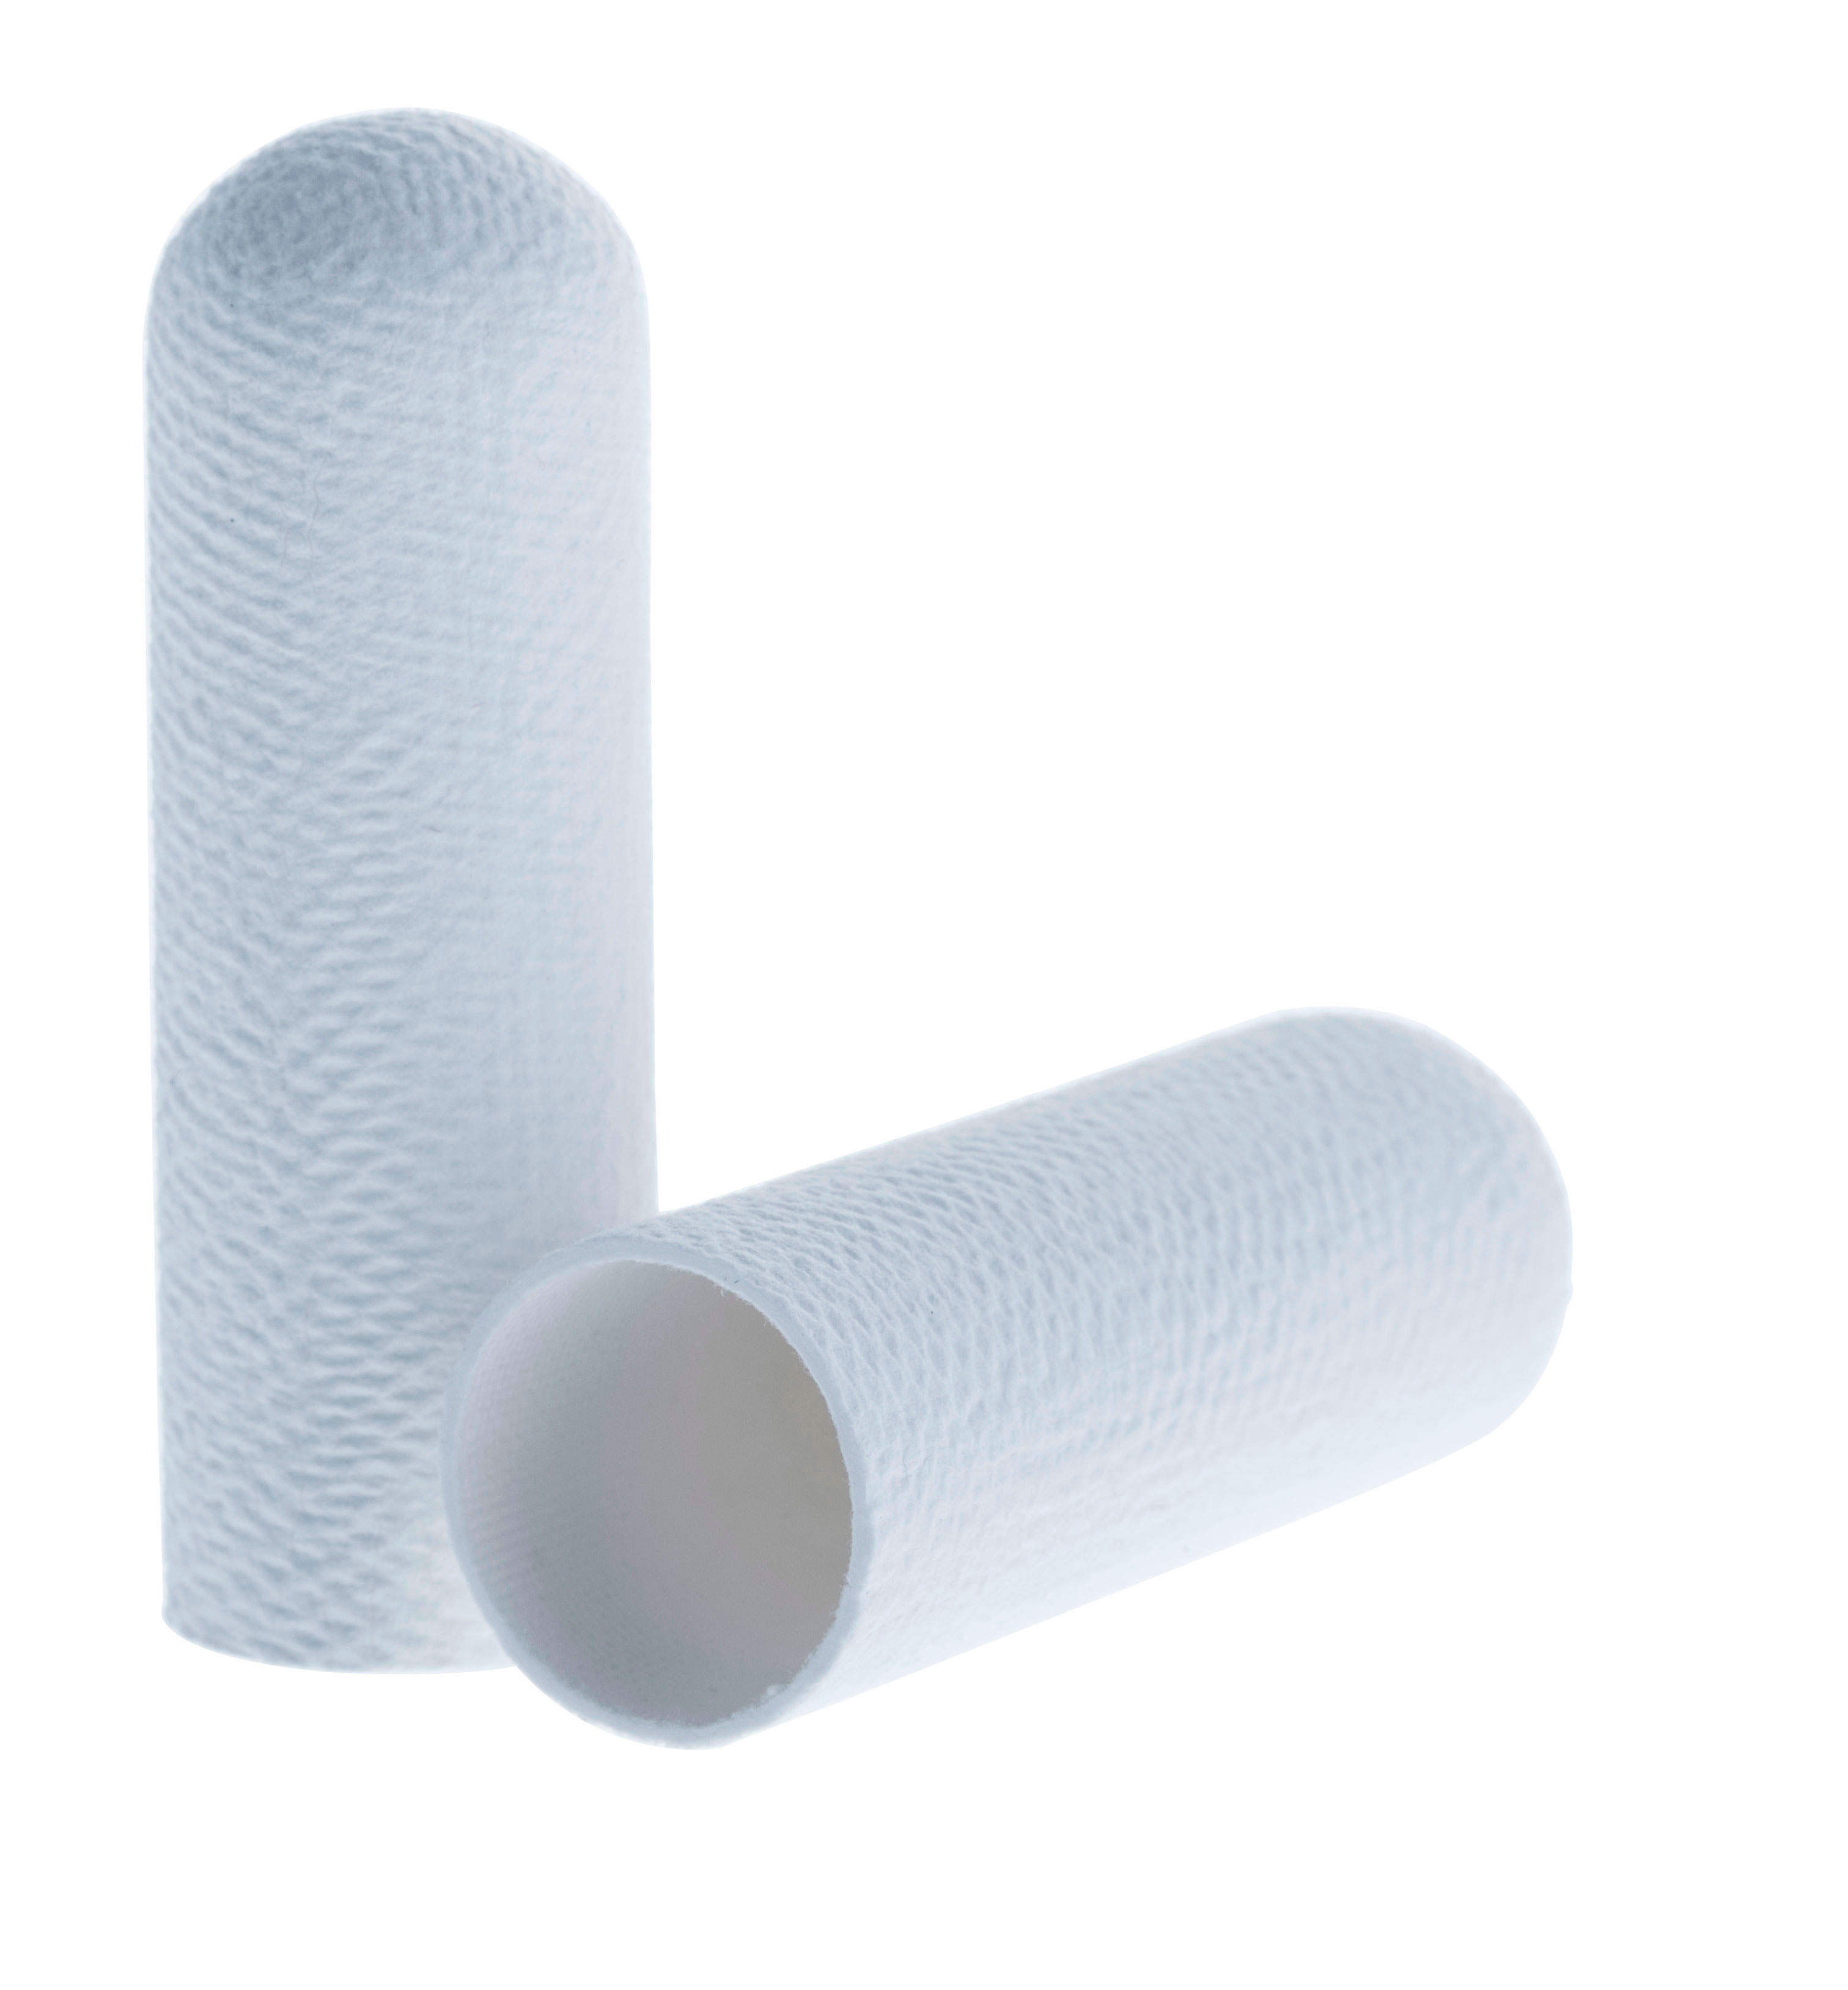 Cellulose extraction thimbles for Soxhlet extraction. SCHARLAU. Standard cellulose cartridge. Dim. Øxlength: 35x120mm. Particle retention in liquid: Nom. 8-15 microns